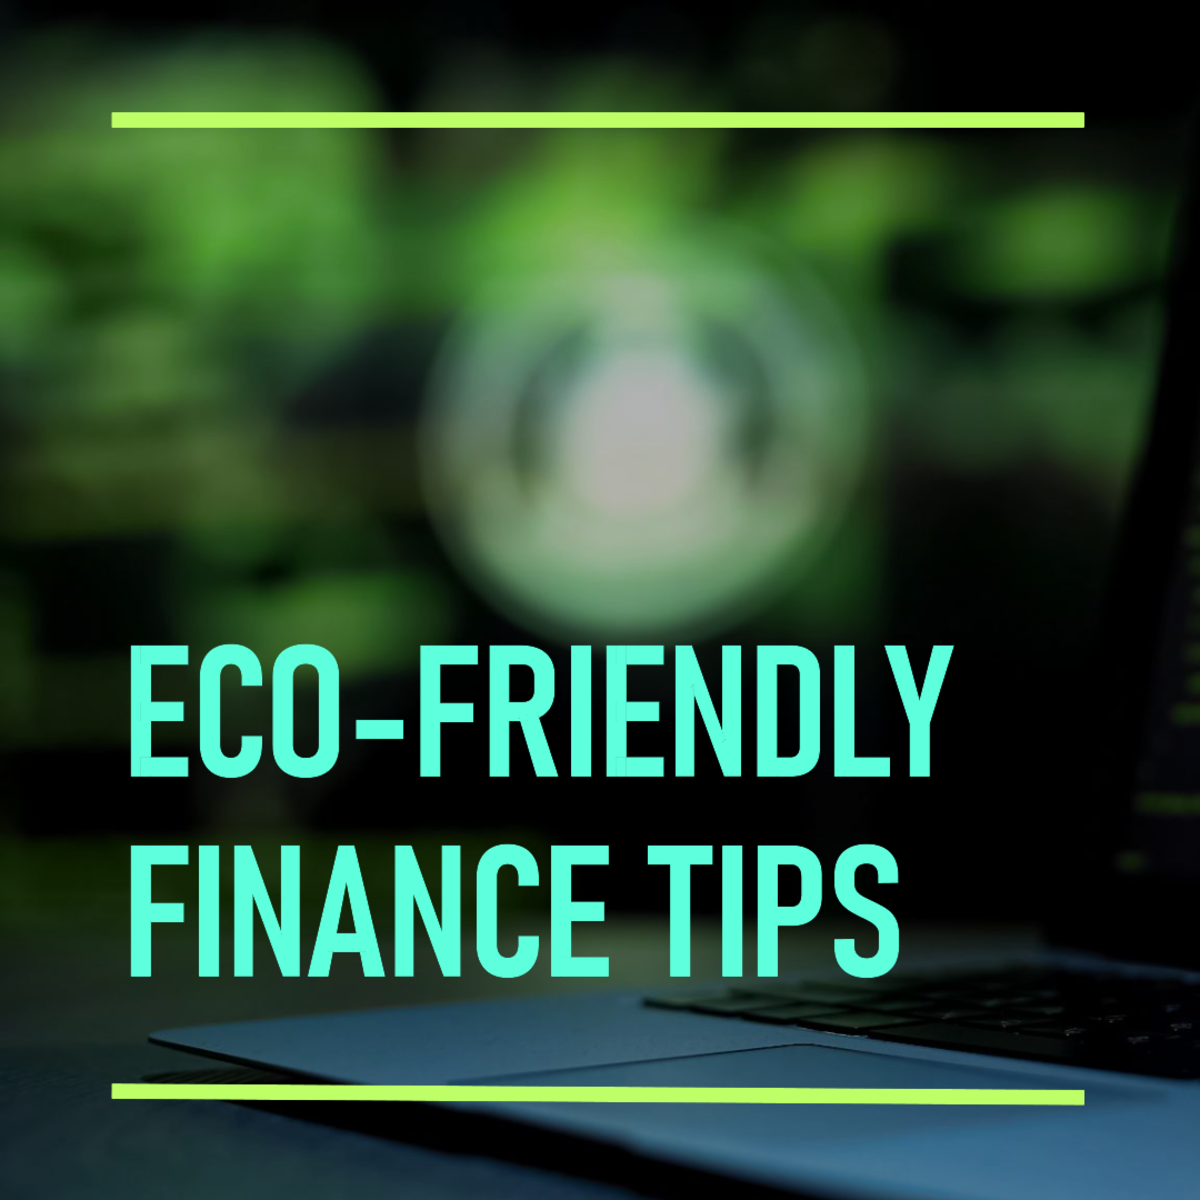 5 Tips for Eco-Friendly Finance: When Finance Talks Nature